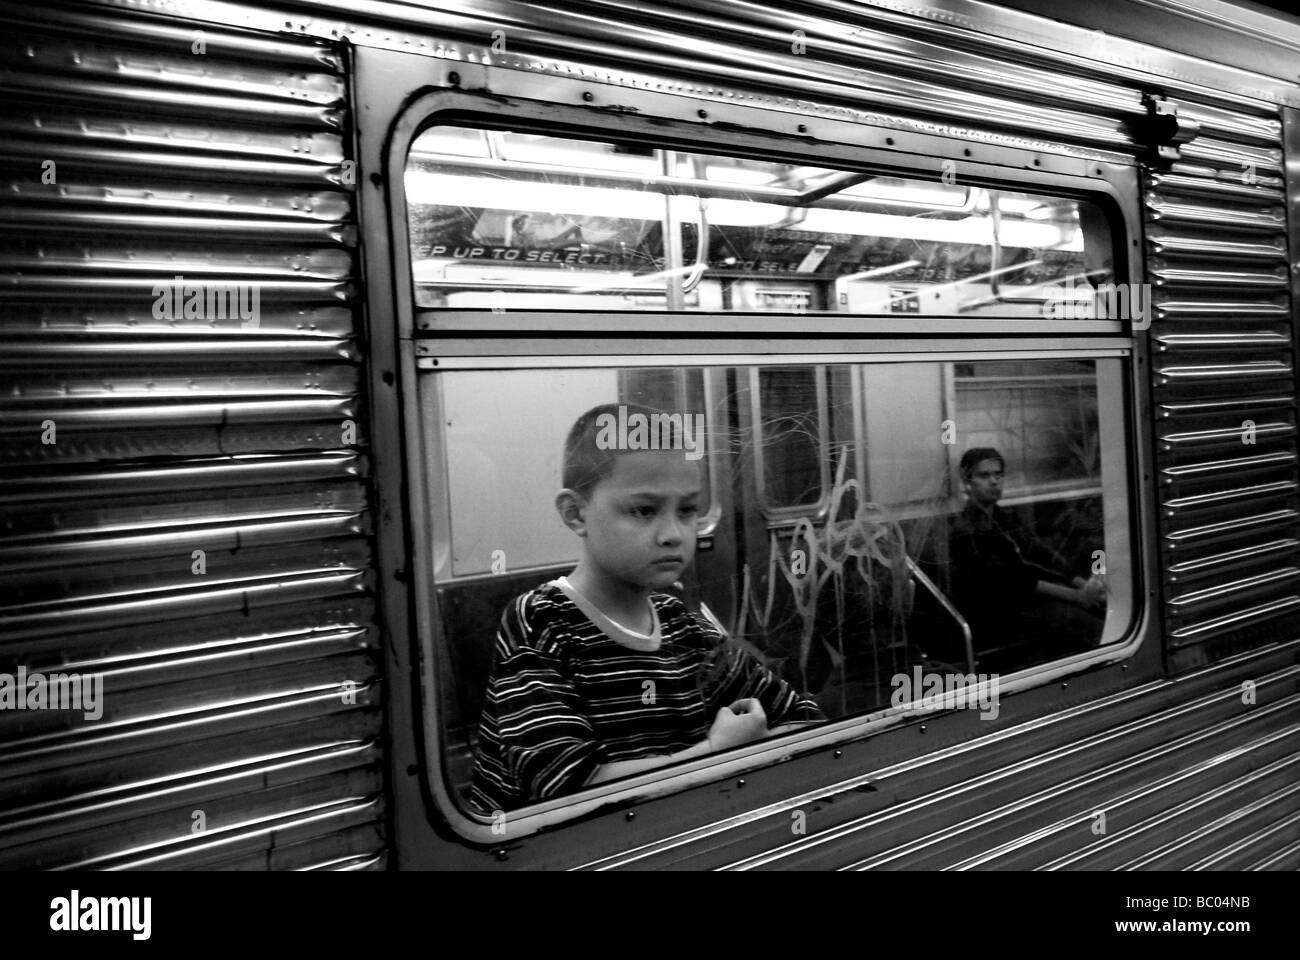 A young boy looks out of subway train window in New York City, New York. Stock Photo